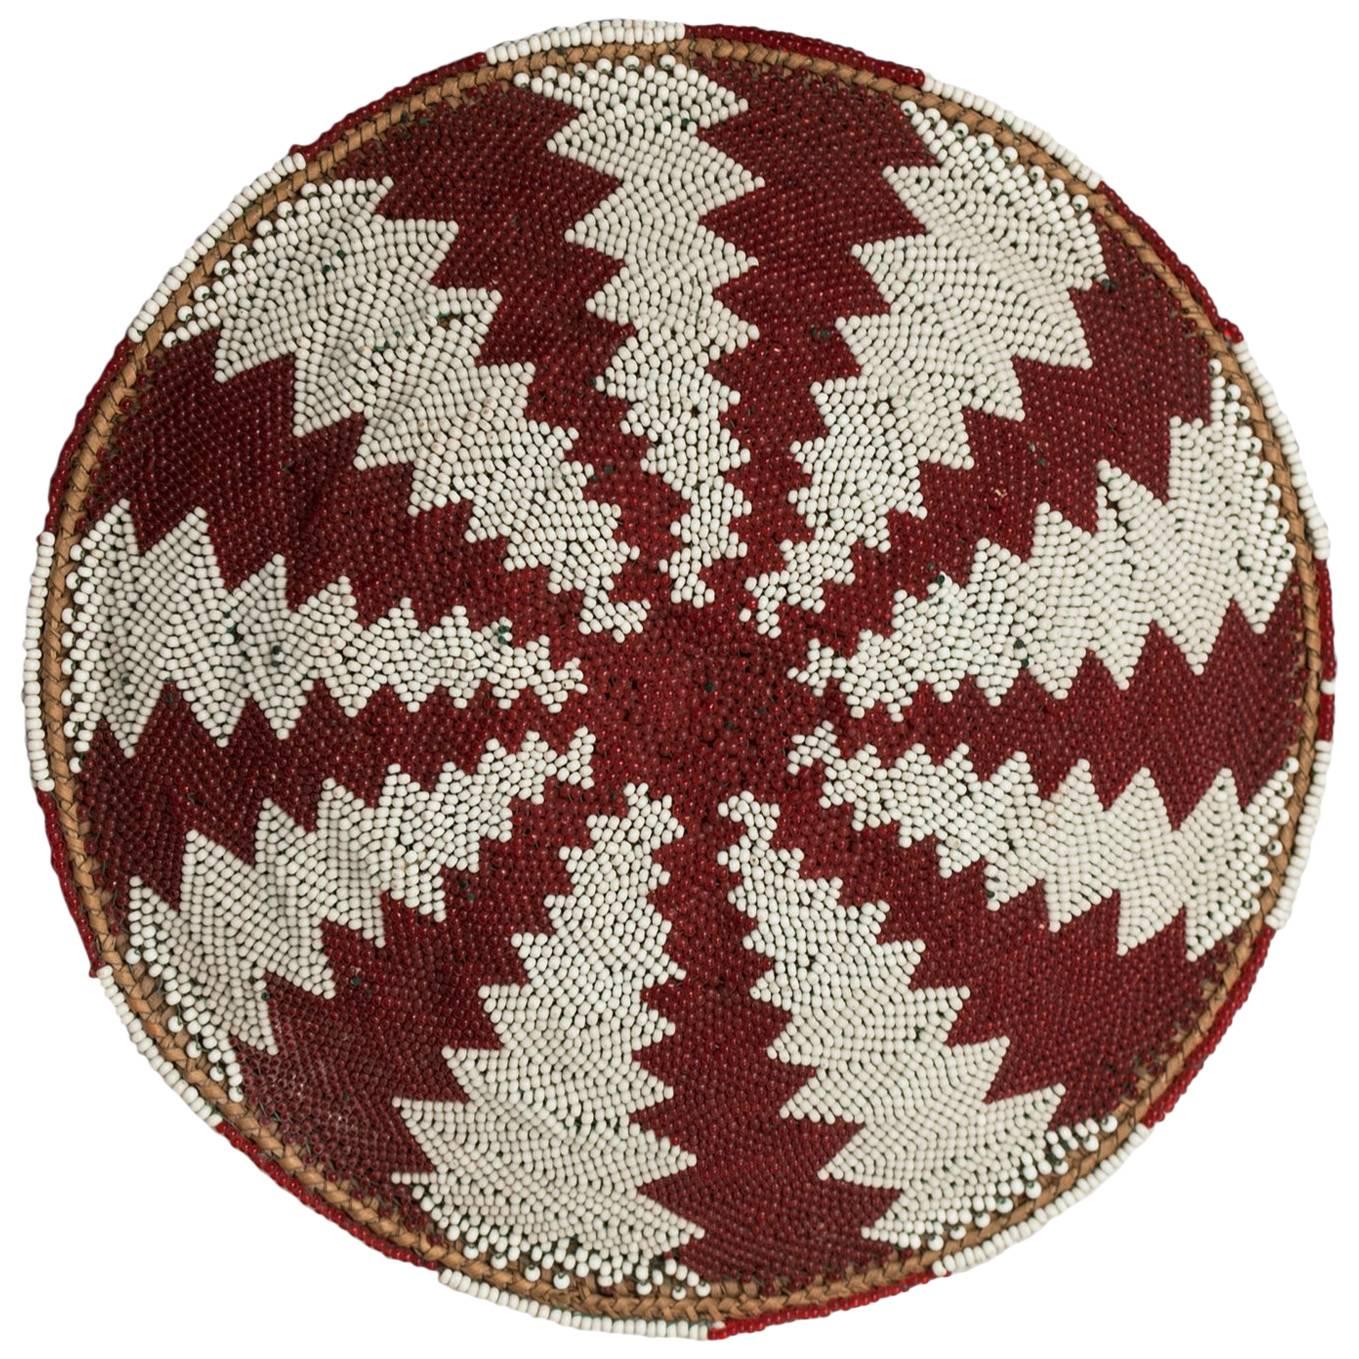 Mid-20th Century Beer Pot Cover ‘Imbengi’ Zulu People, South Africa